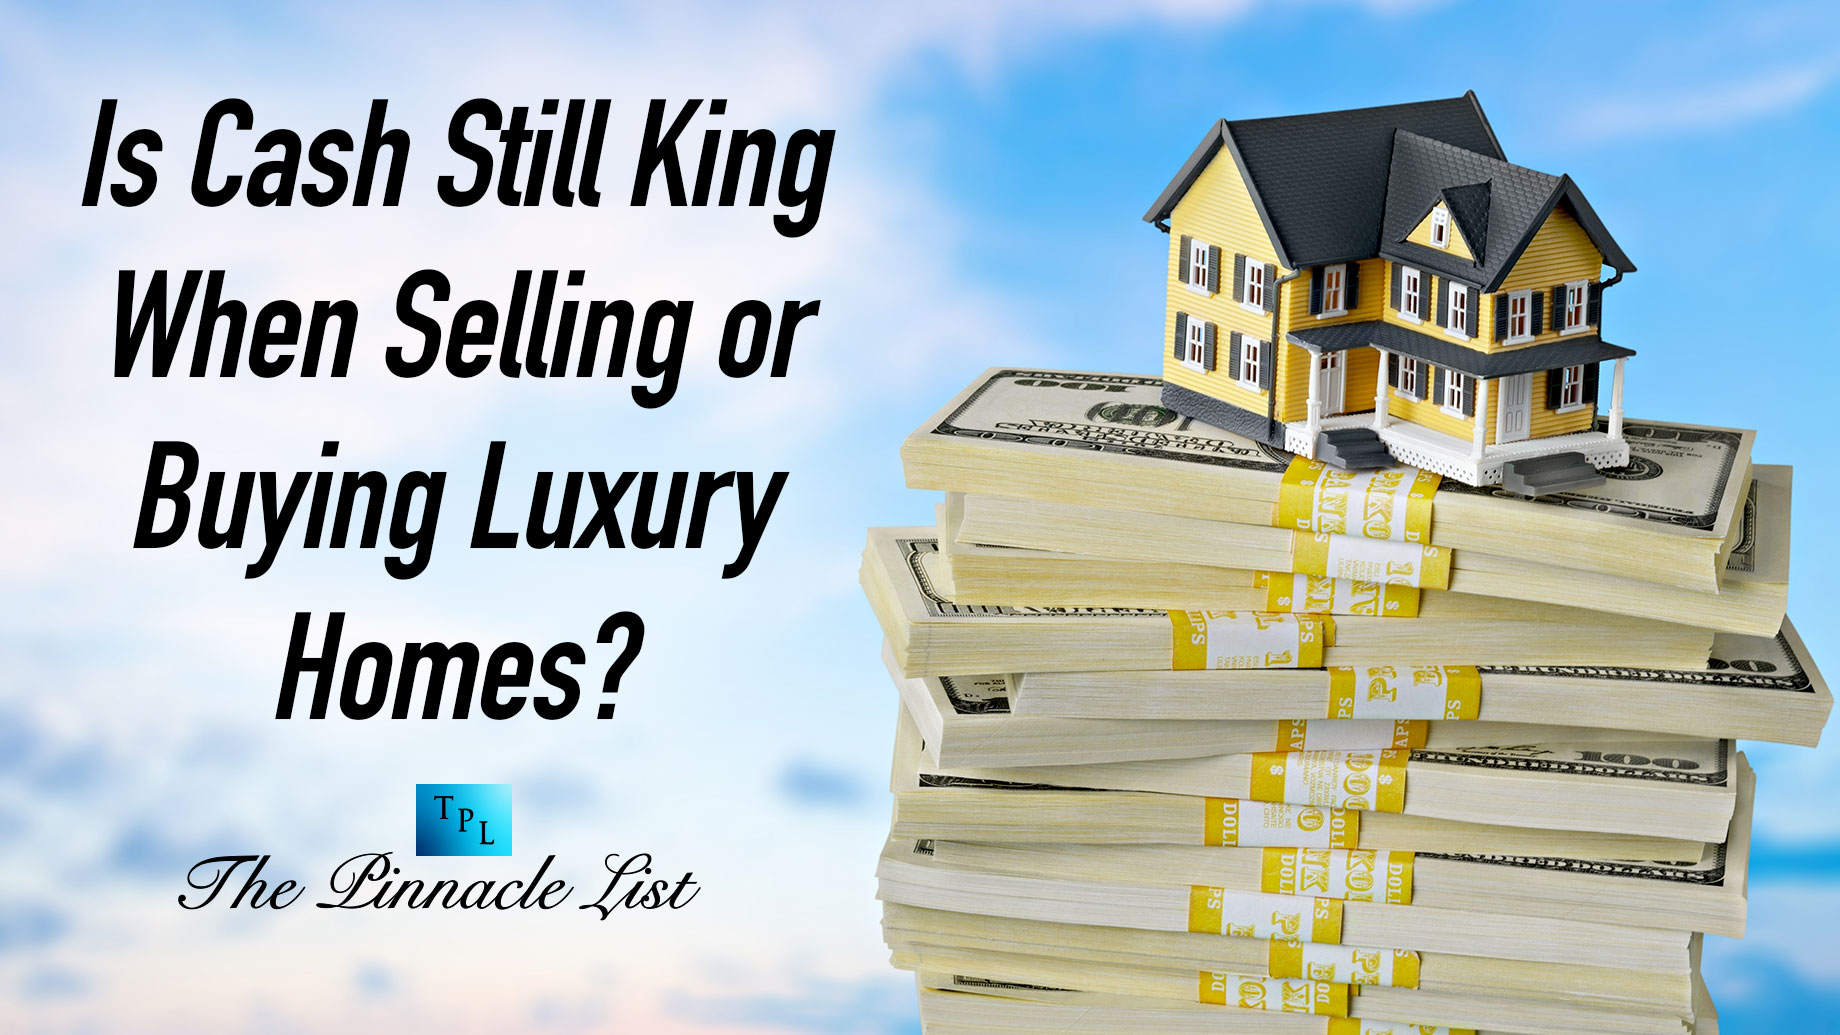 Is Cash Still King When Selling or Buying Luxury Homes?